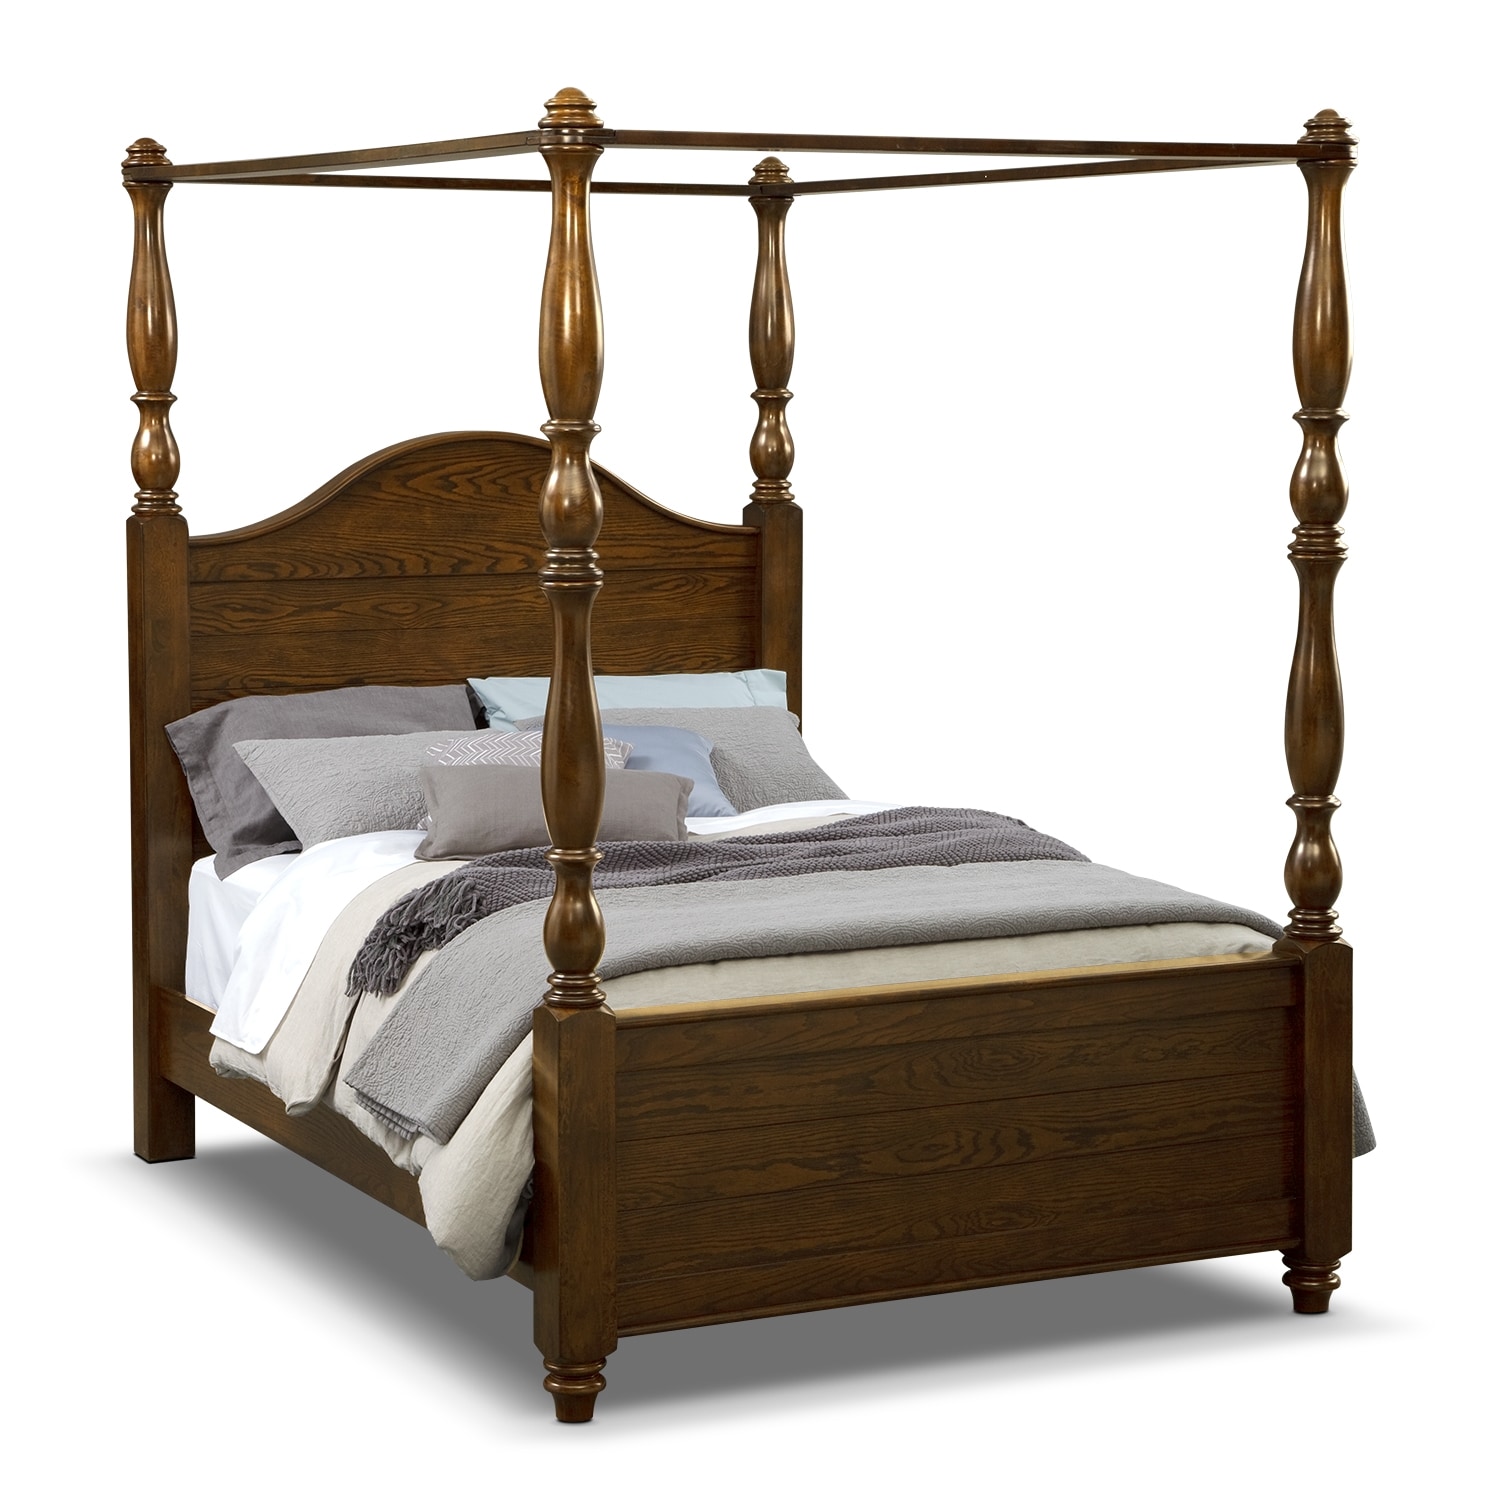 Carlyle Rustic Canopy King Bed by Pulaski